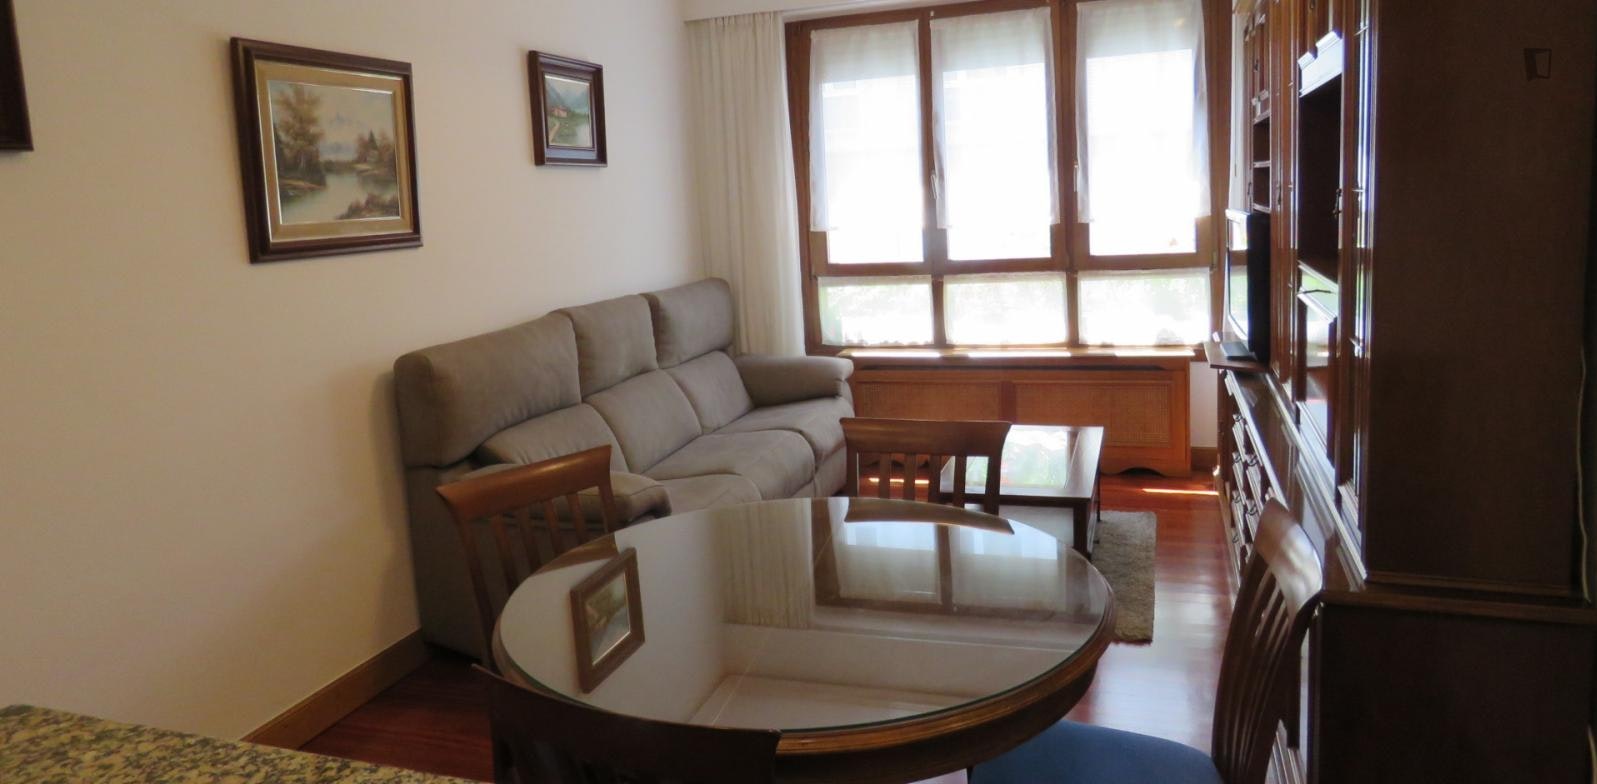 2-bedroom apartment, with outdoor area